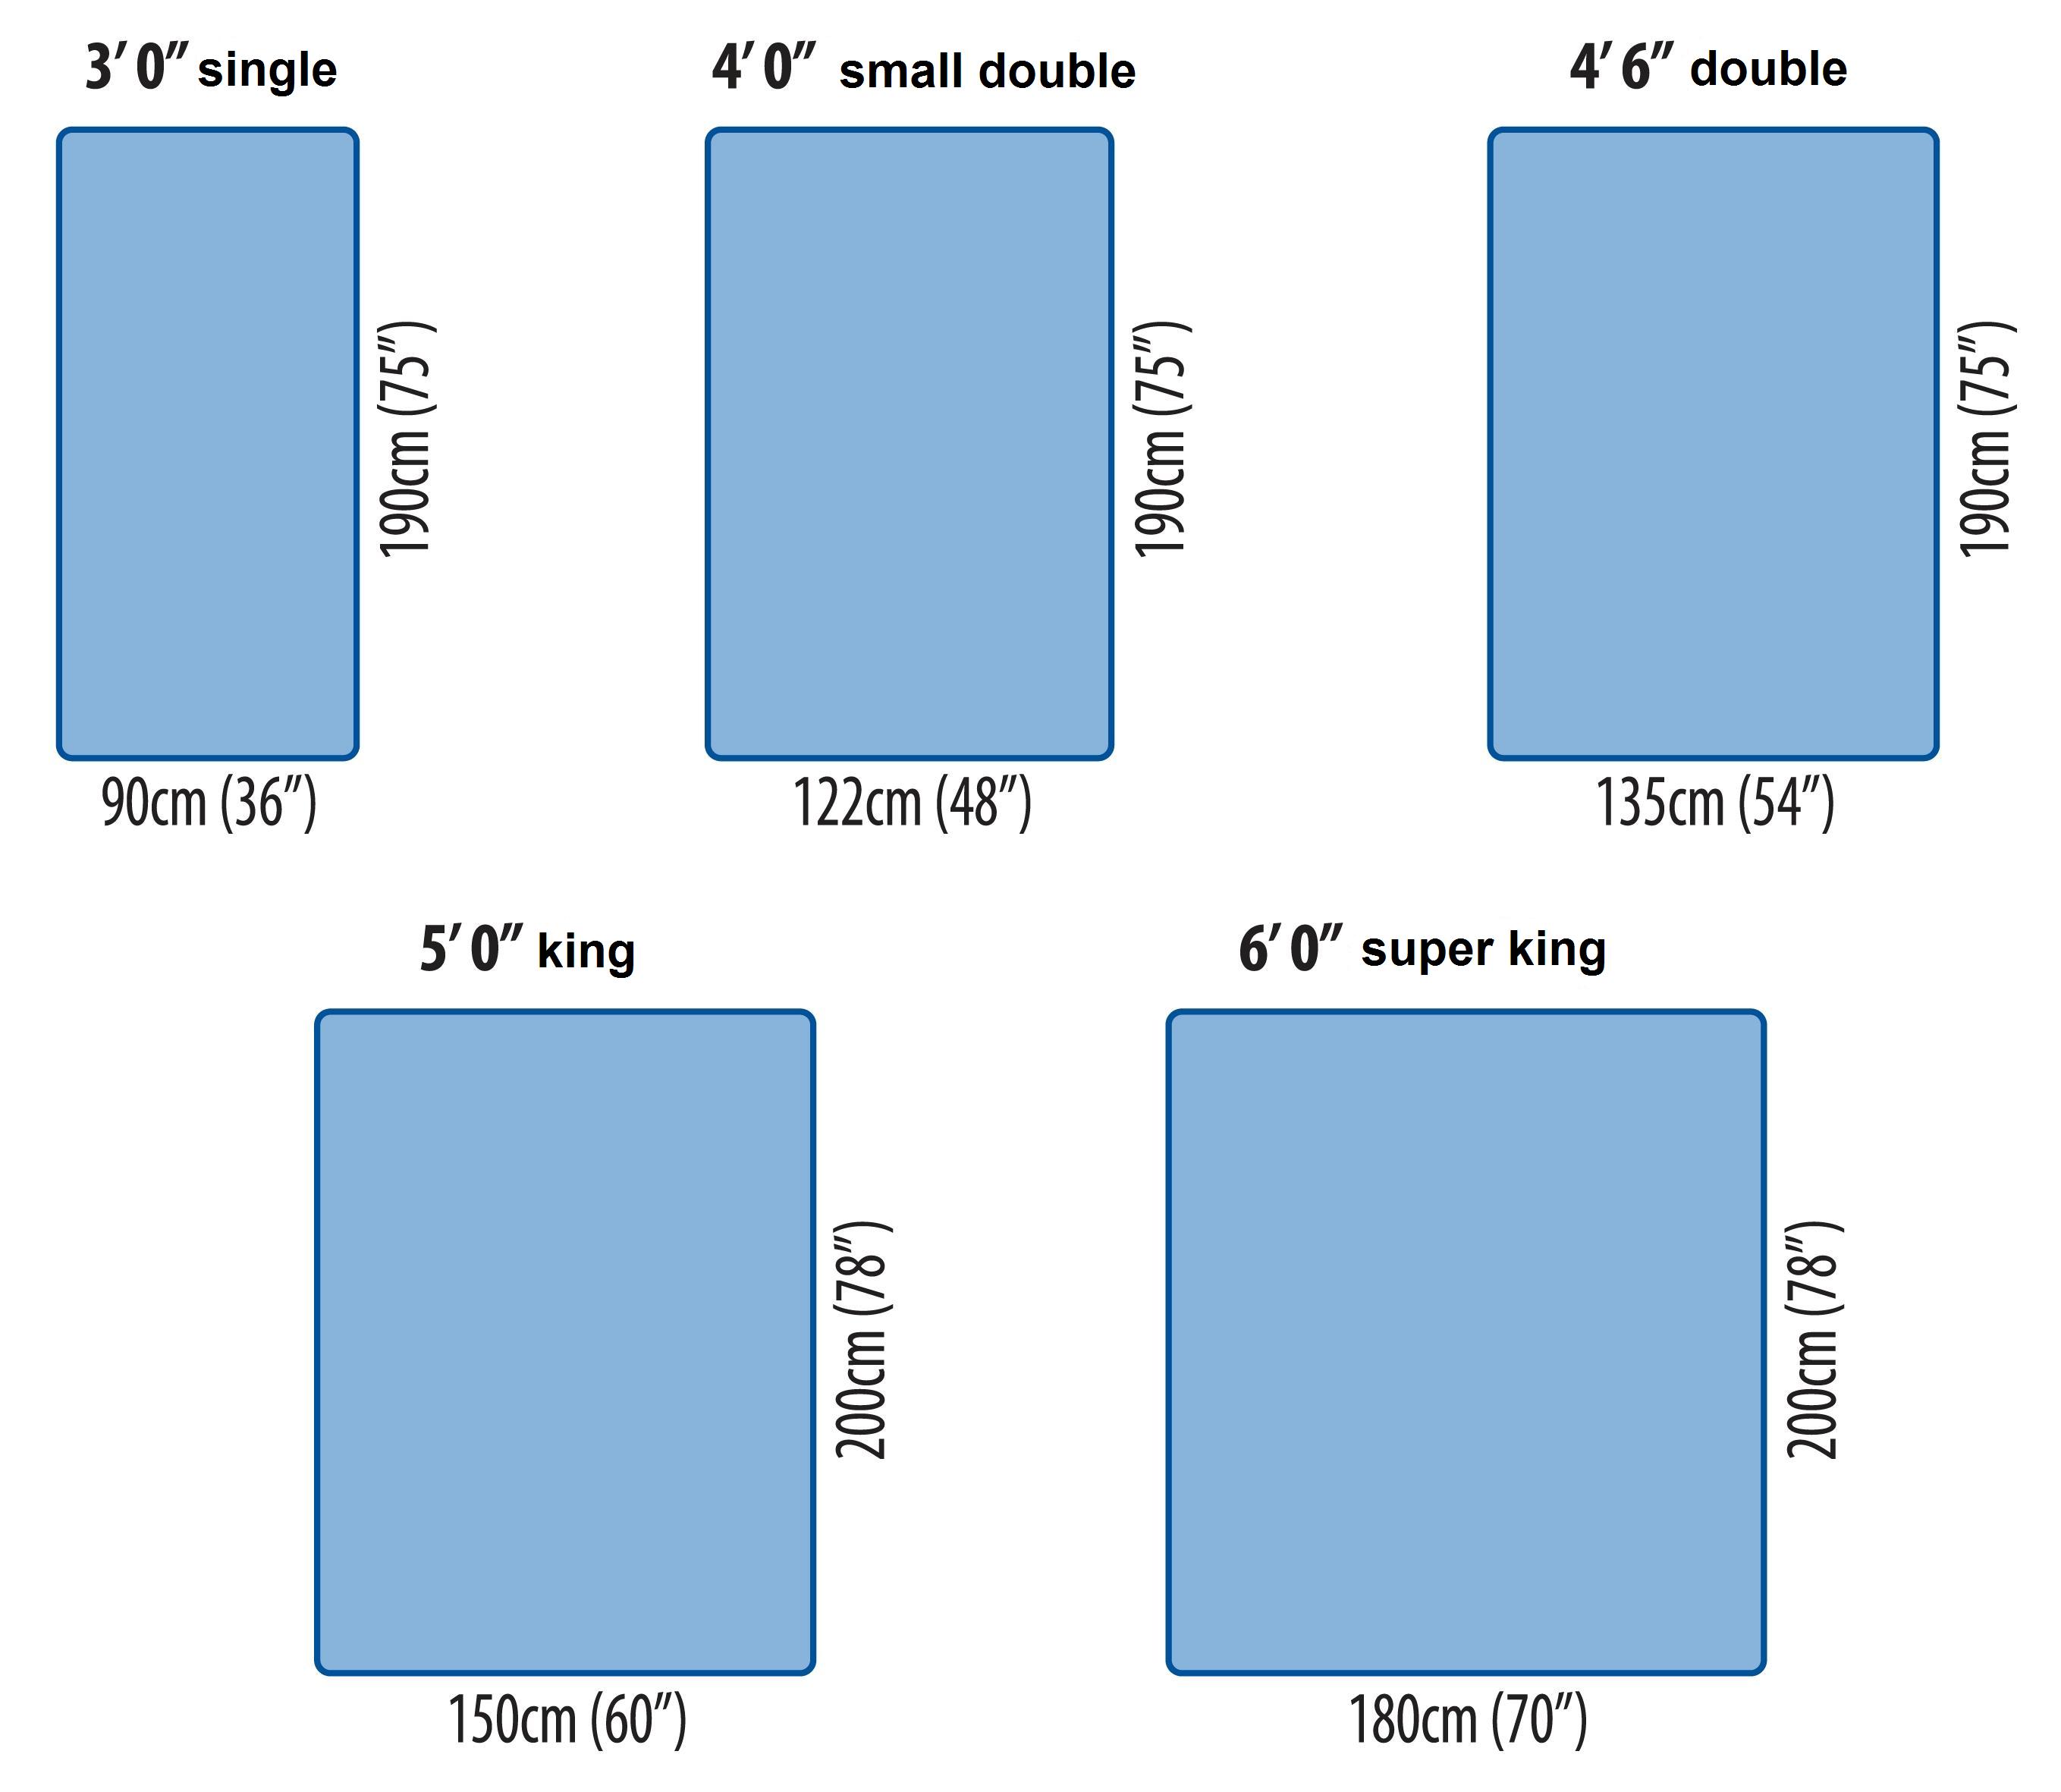 These are the standard sizes for UK Mattresses